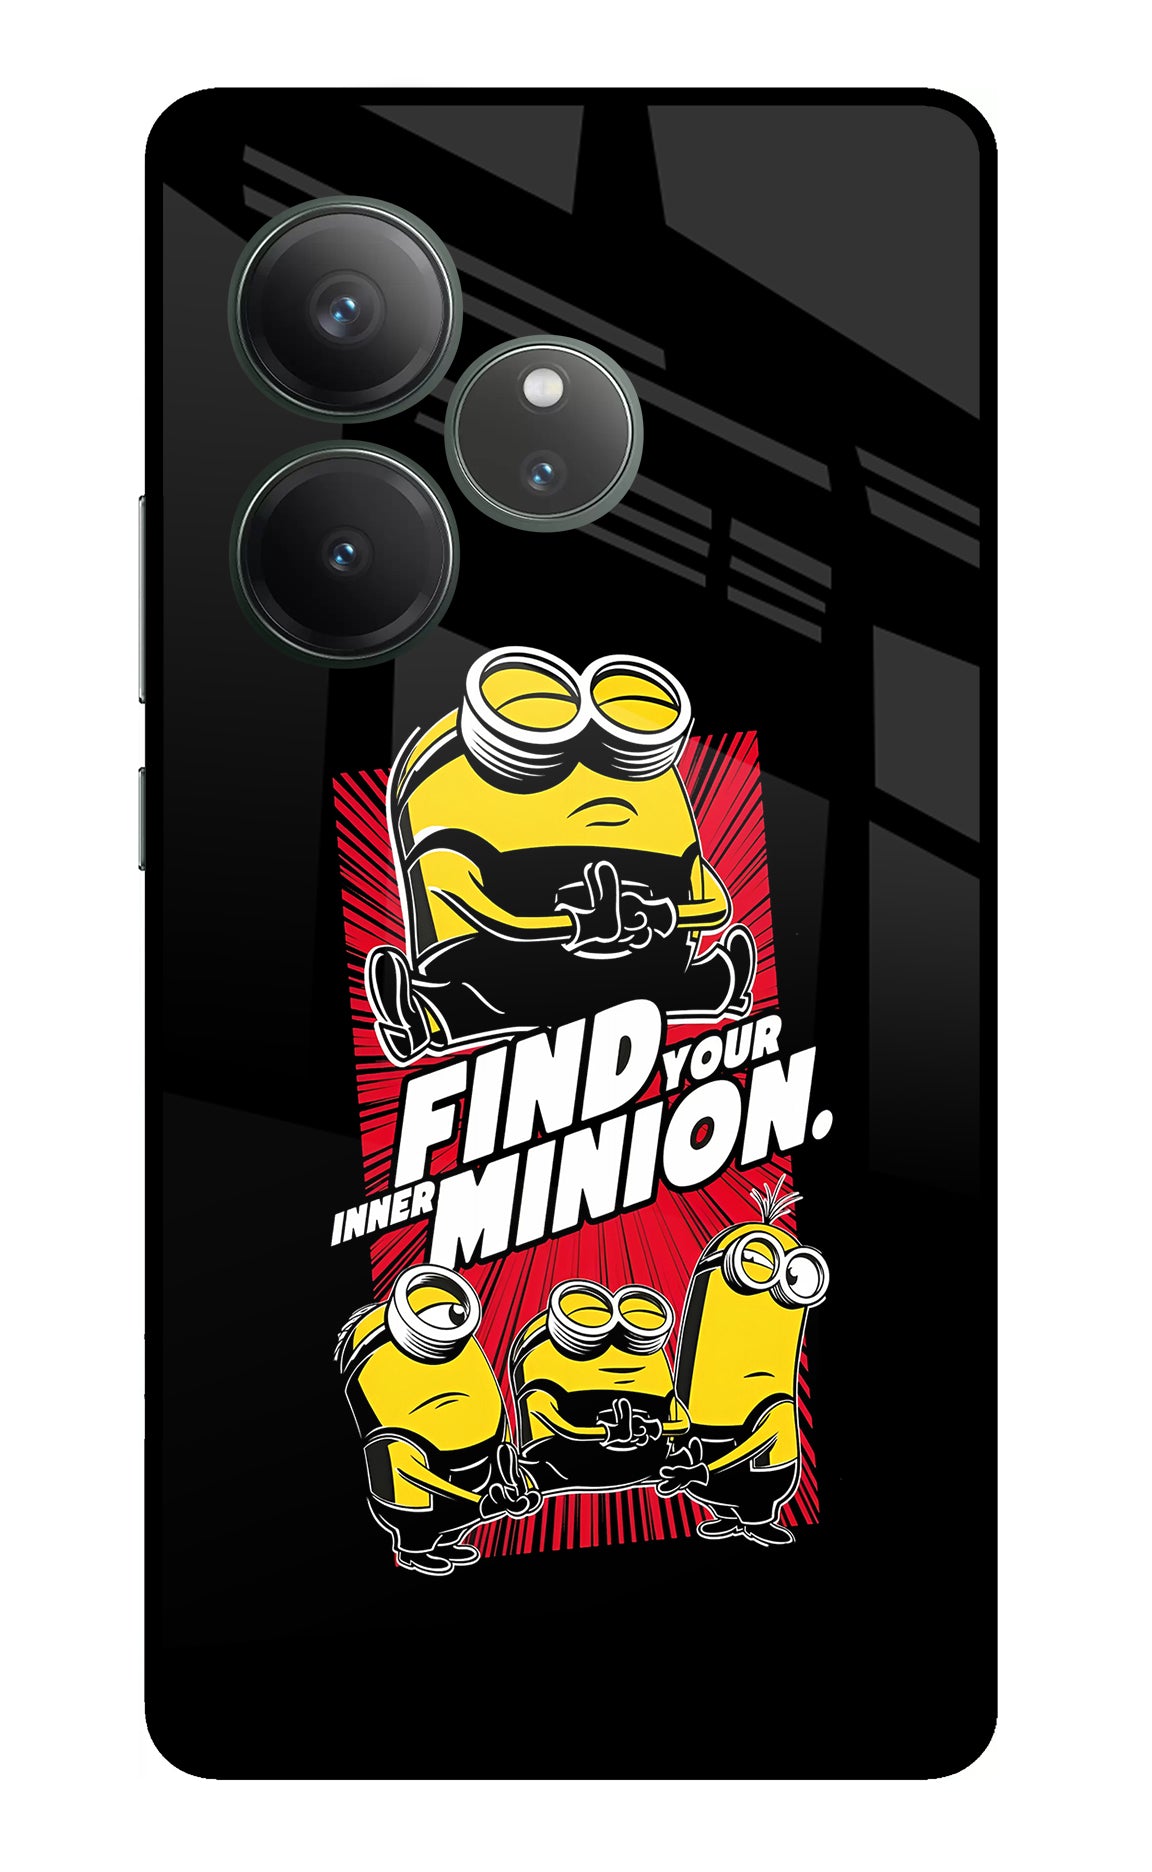 Find your inner Minion Realme GT 6 Glass Case